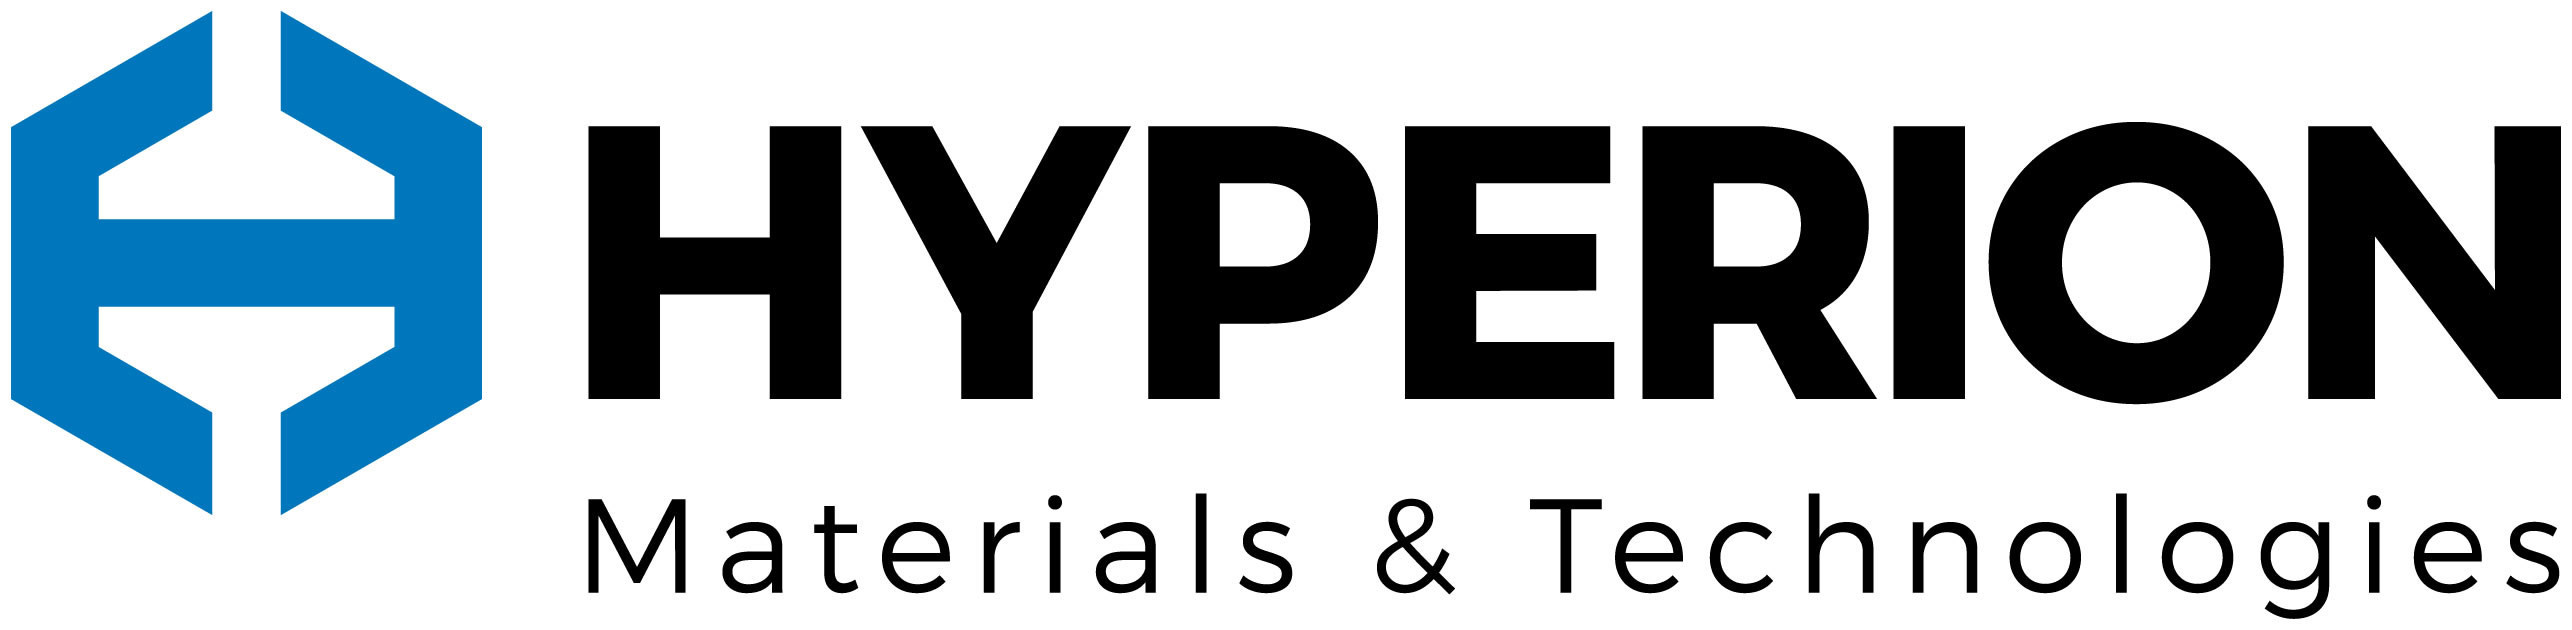 Hyperion Materials & Technologies is a global leader in hard and super-hard materials. (PRNewsfoto/Hyperion Materials & Technologies)